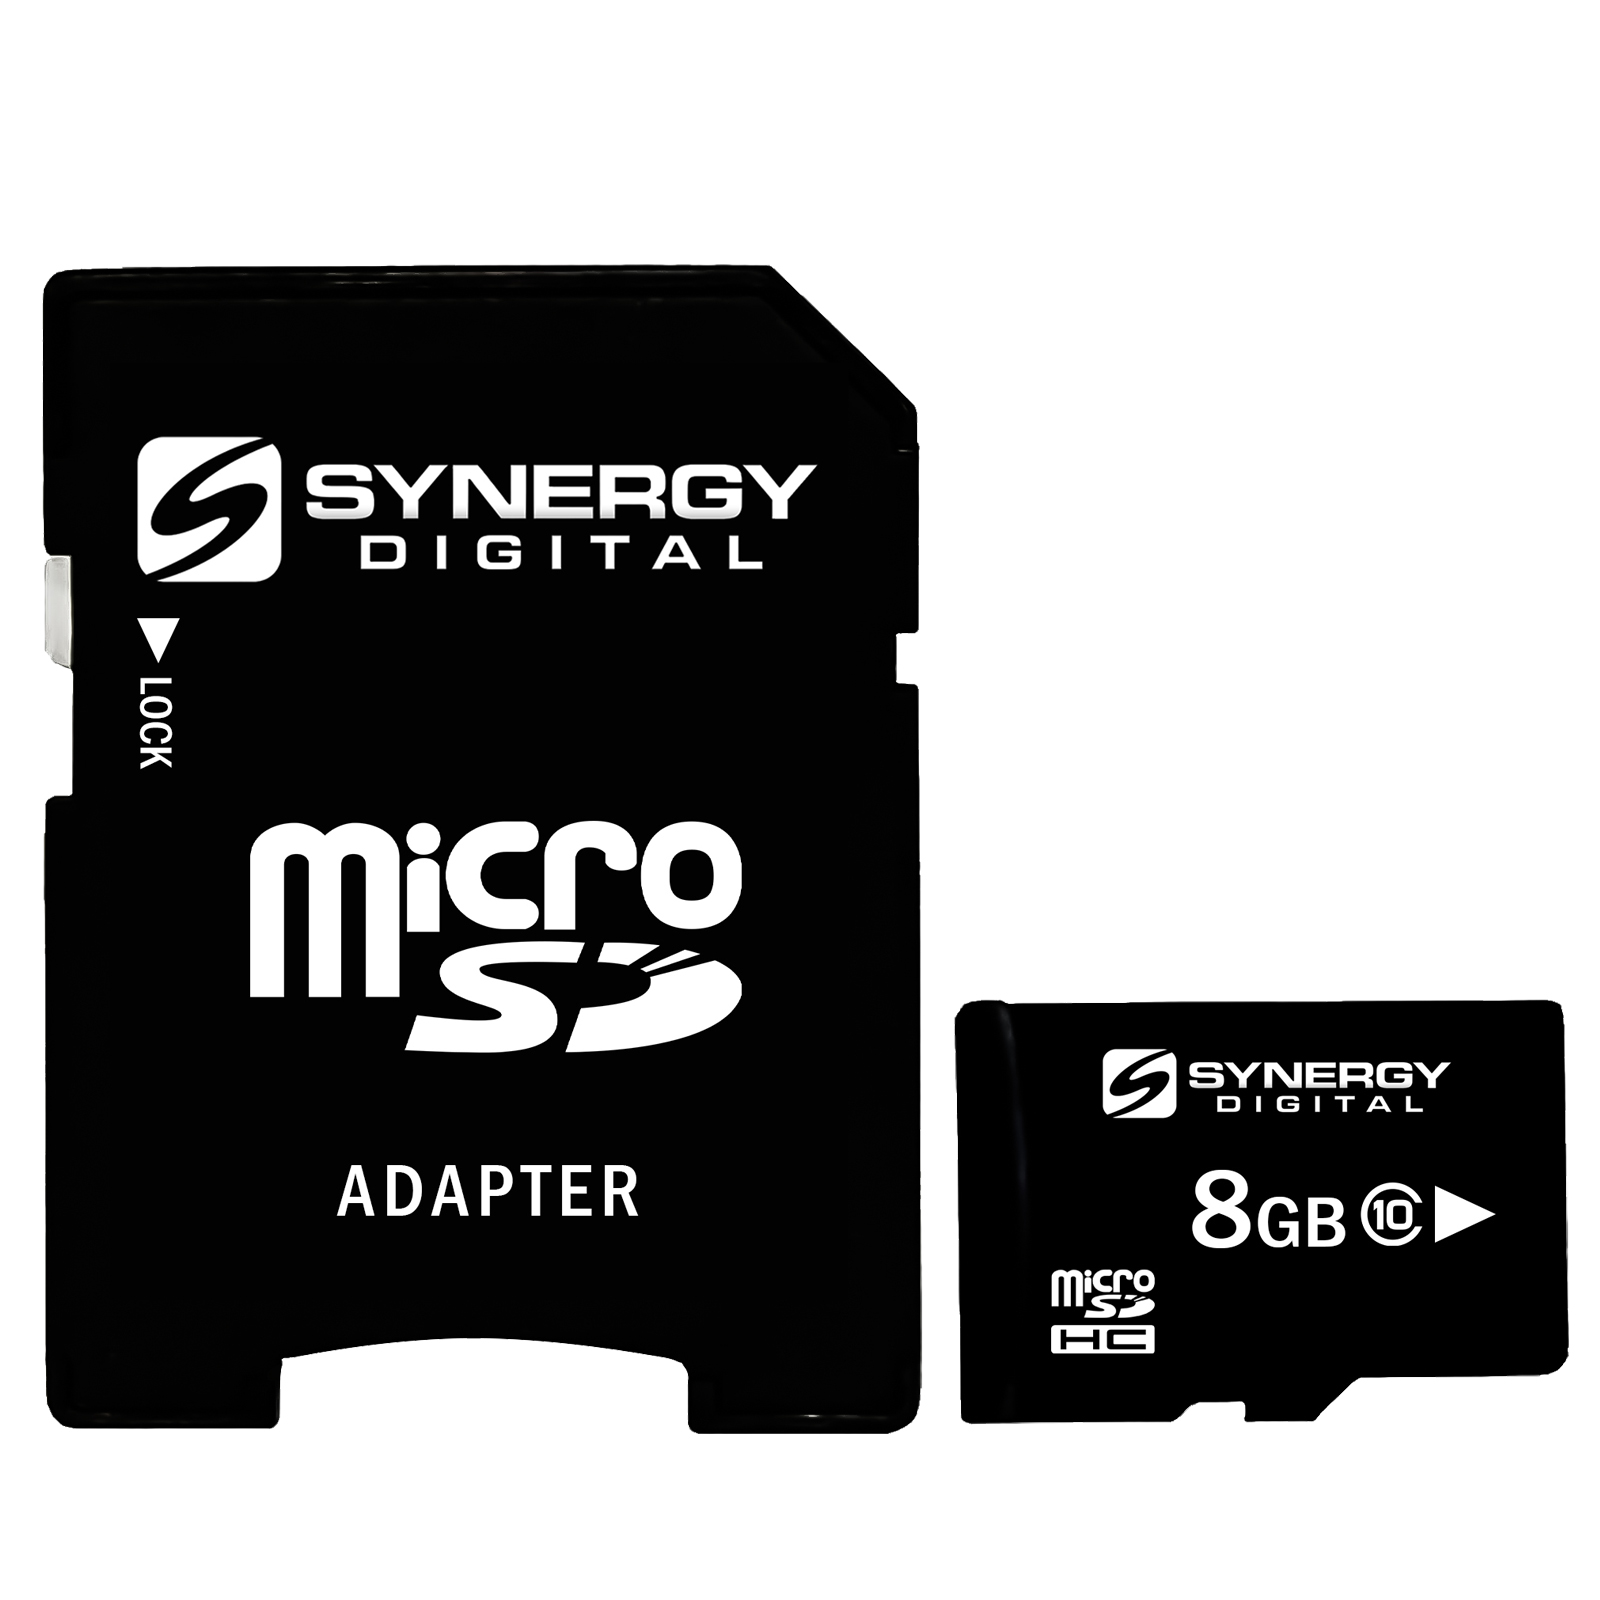 Memory Cards for LGCell Phone